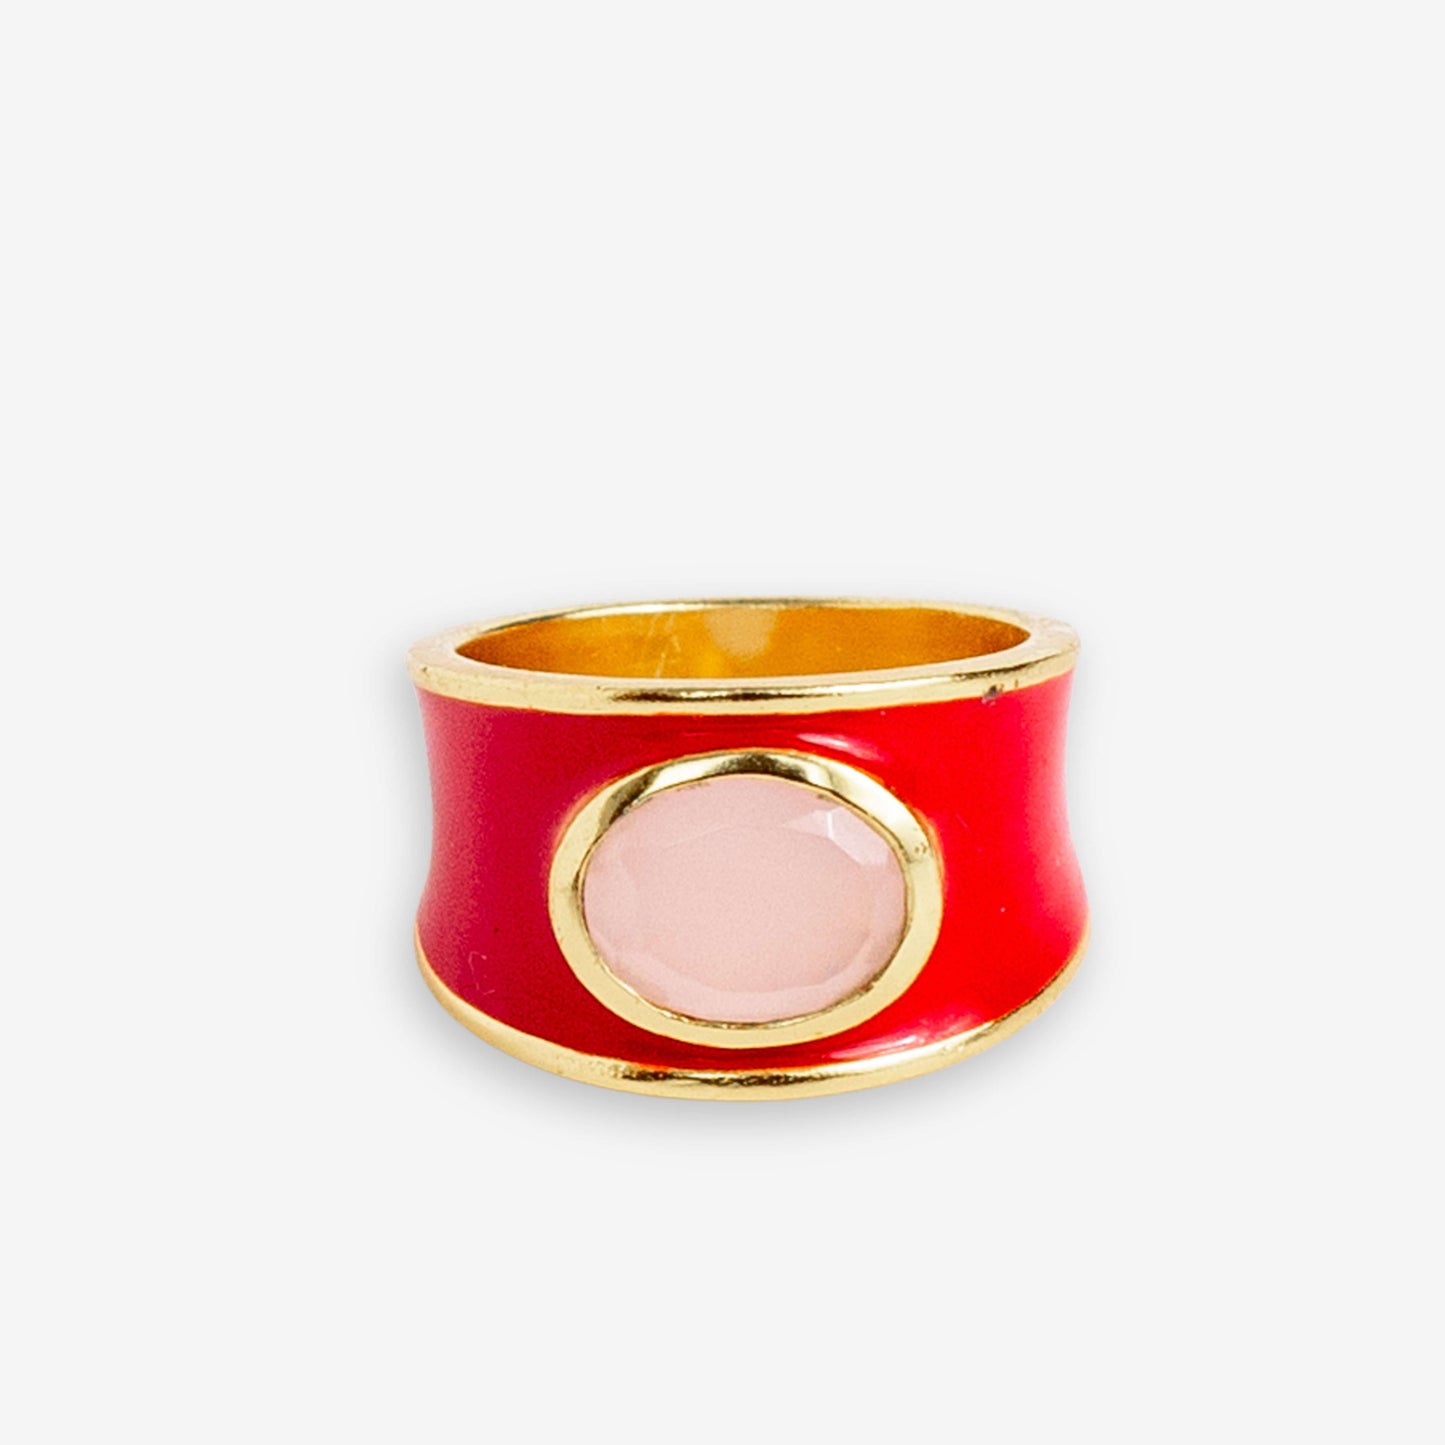 Hazel Oval Stone With Enamel Band Ring Red/Blush Red/Blush- Size 7 RING